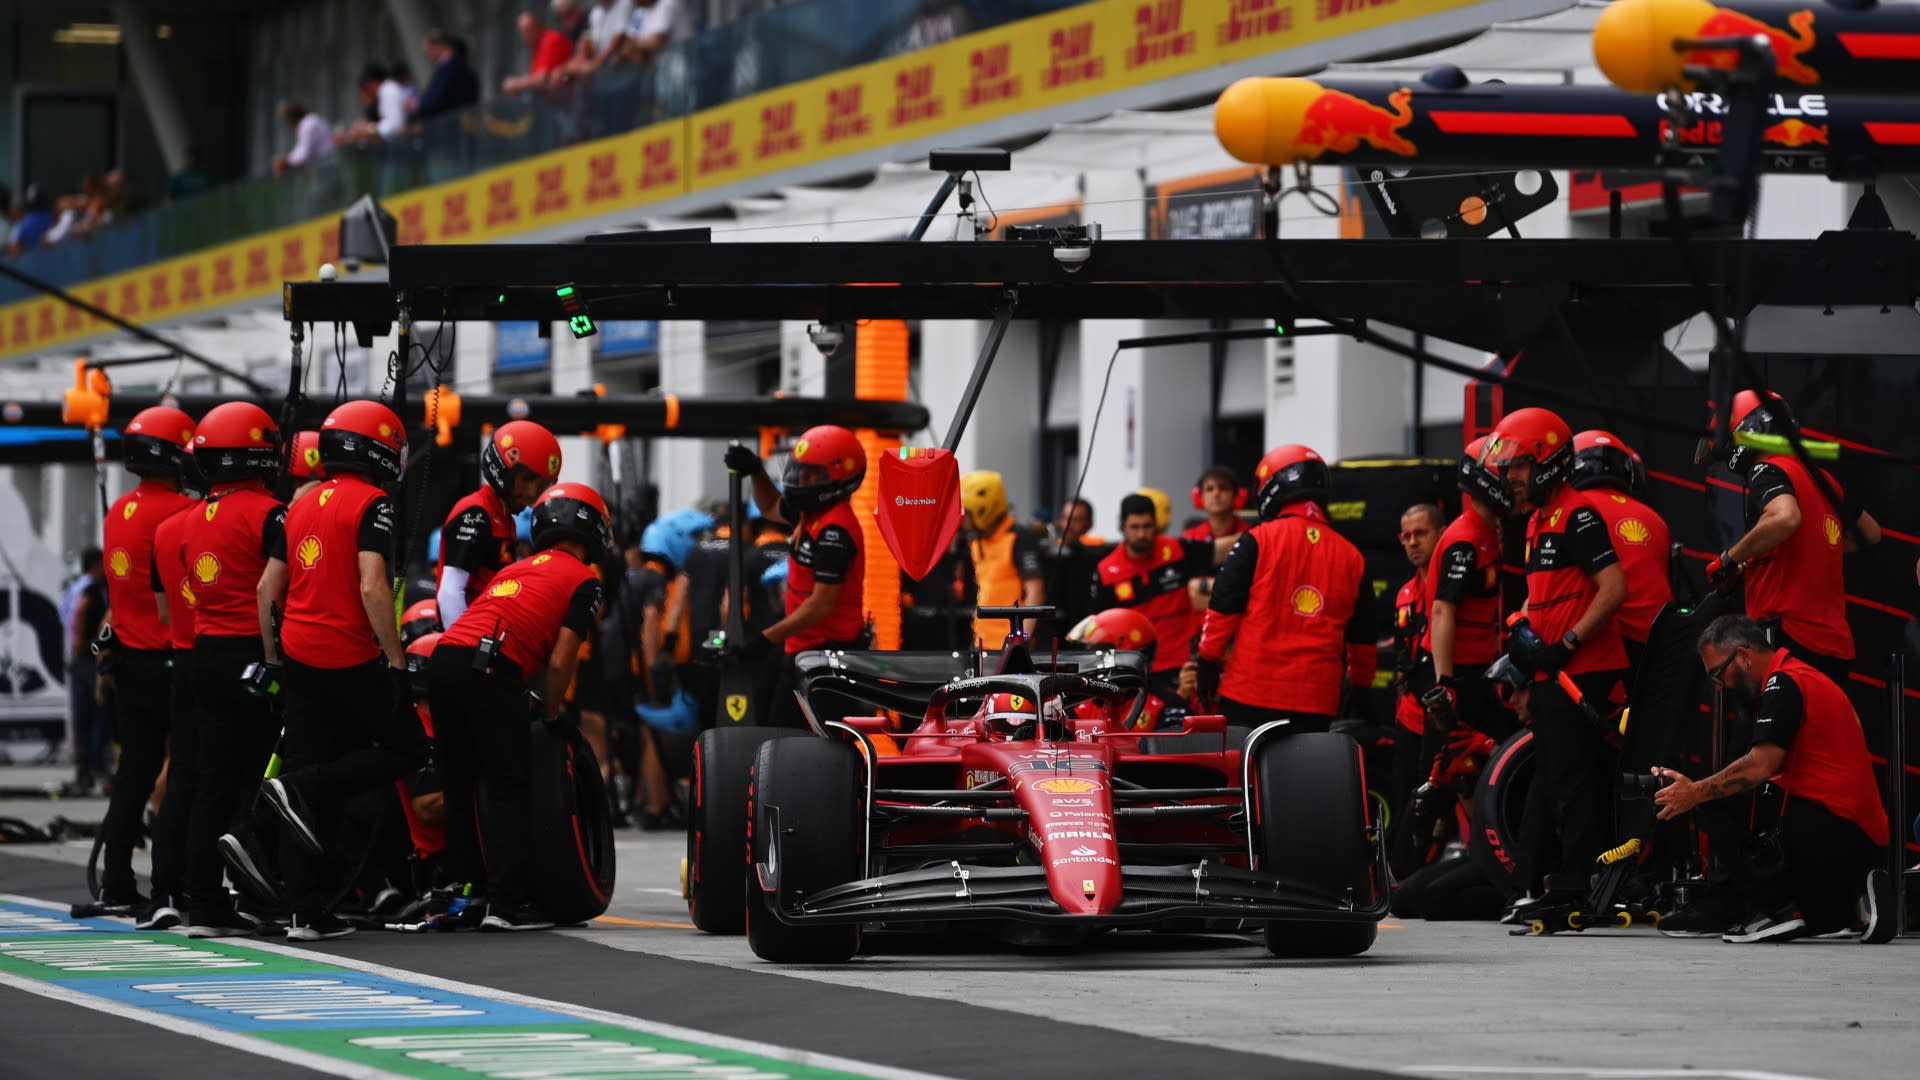 Can Vasseur sort out Ferrari strategy and pitstop woes?